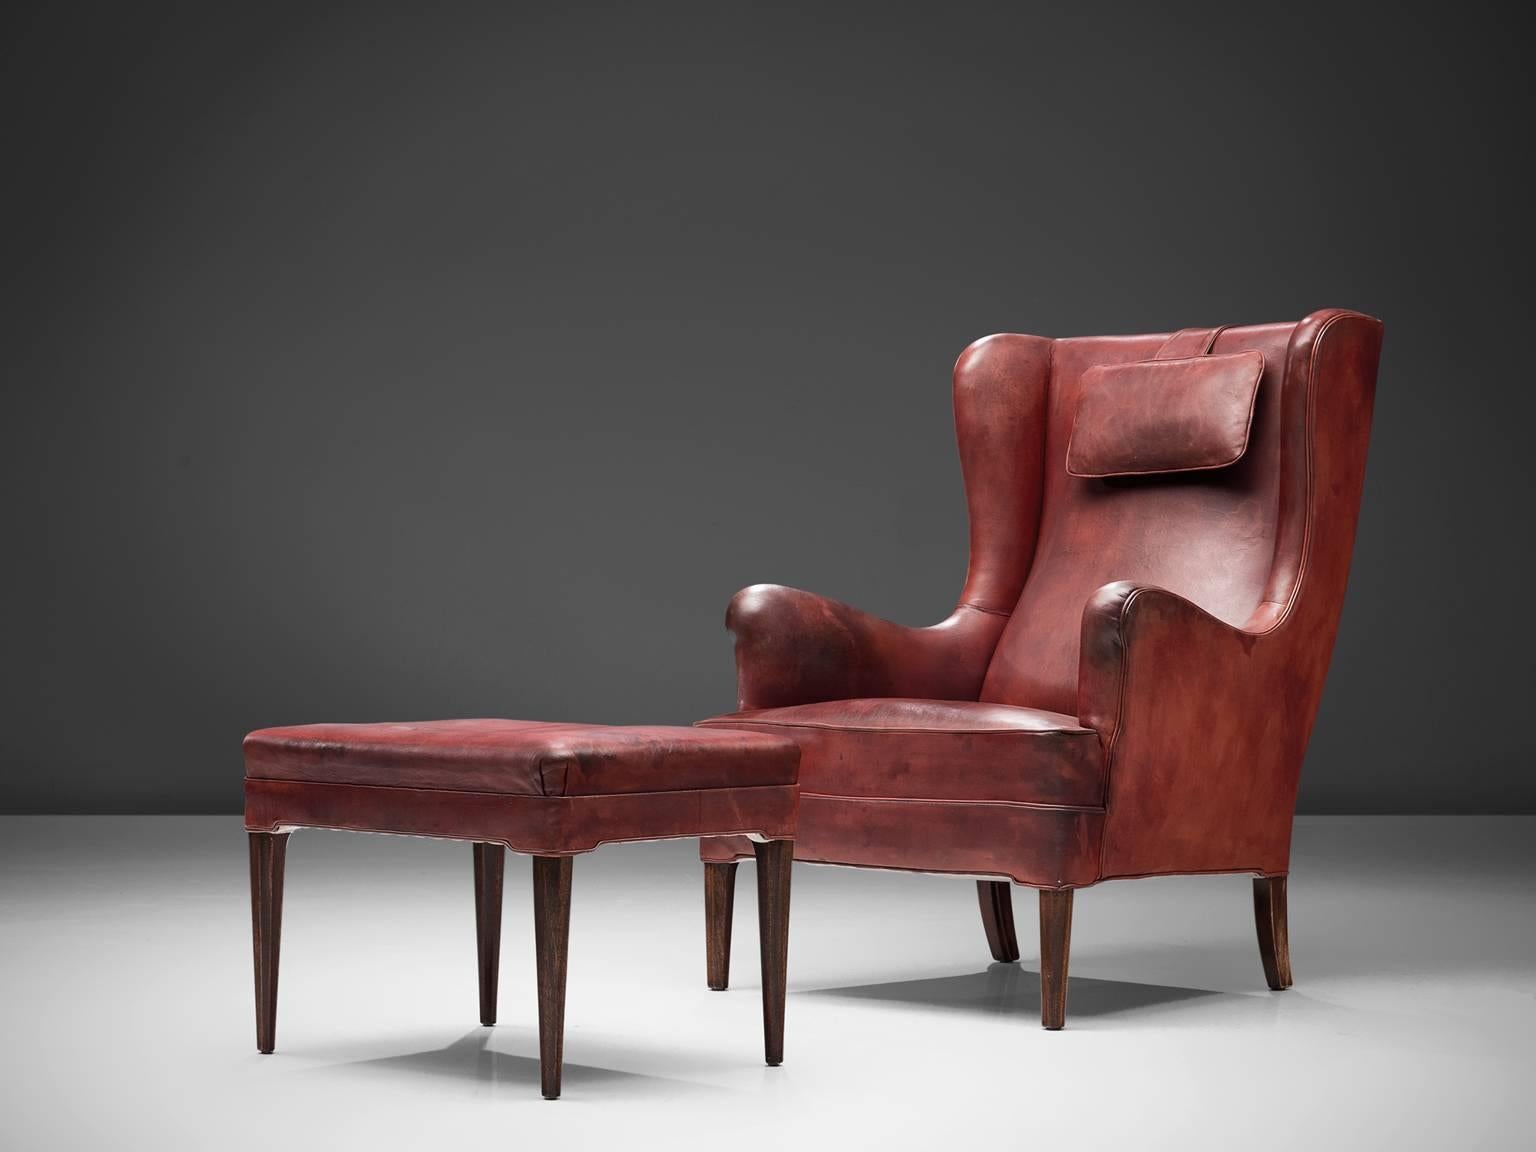 Frits Henningsen, wingback chair and ottoman, red cognac leather and wood, by Denmark 1940s. 

Classical wingback chair with accompanying footstool in patinated cognac leather. This chair and ottoman hold their original cognac leather upholstery.